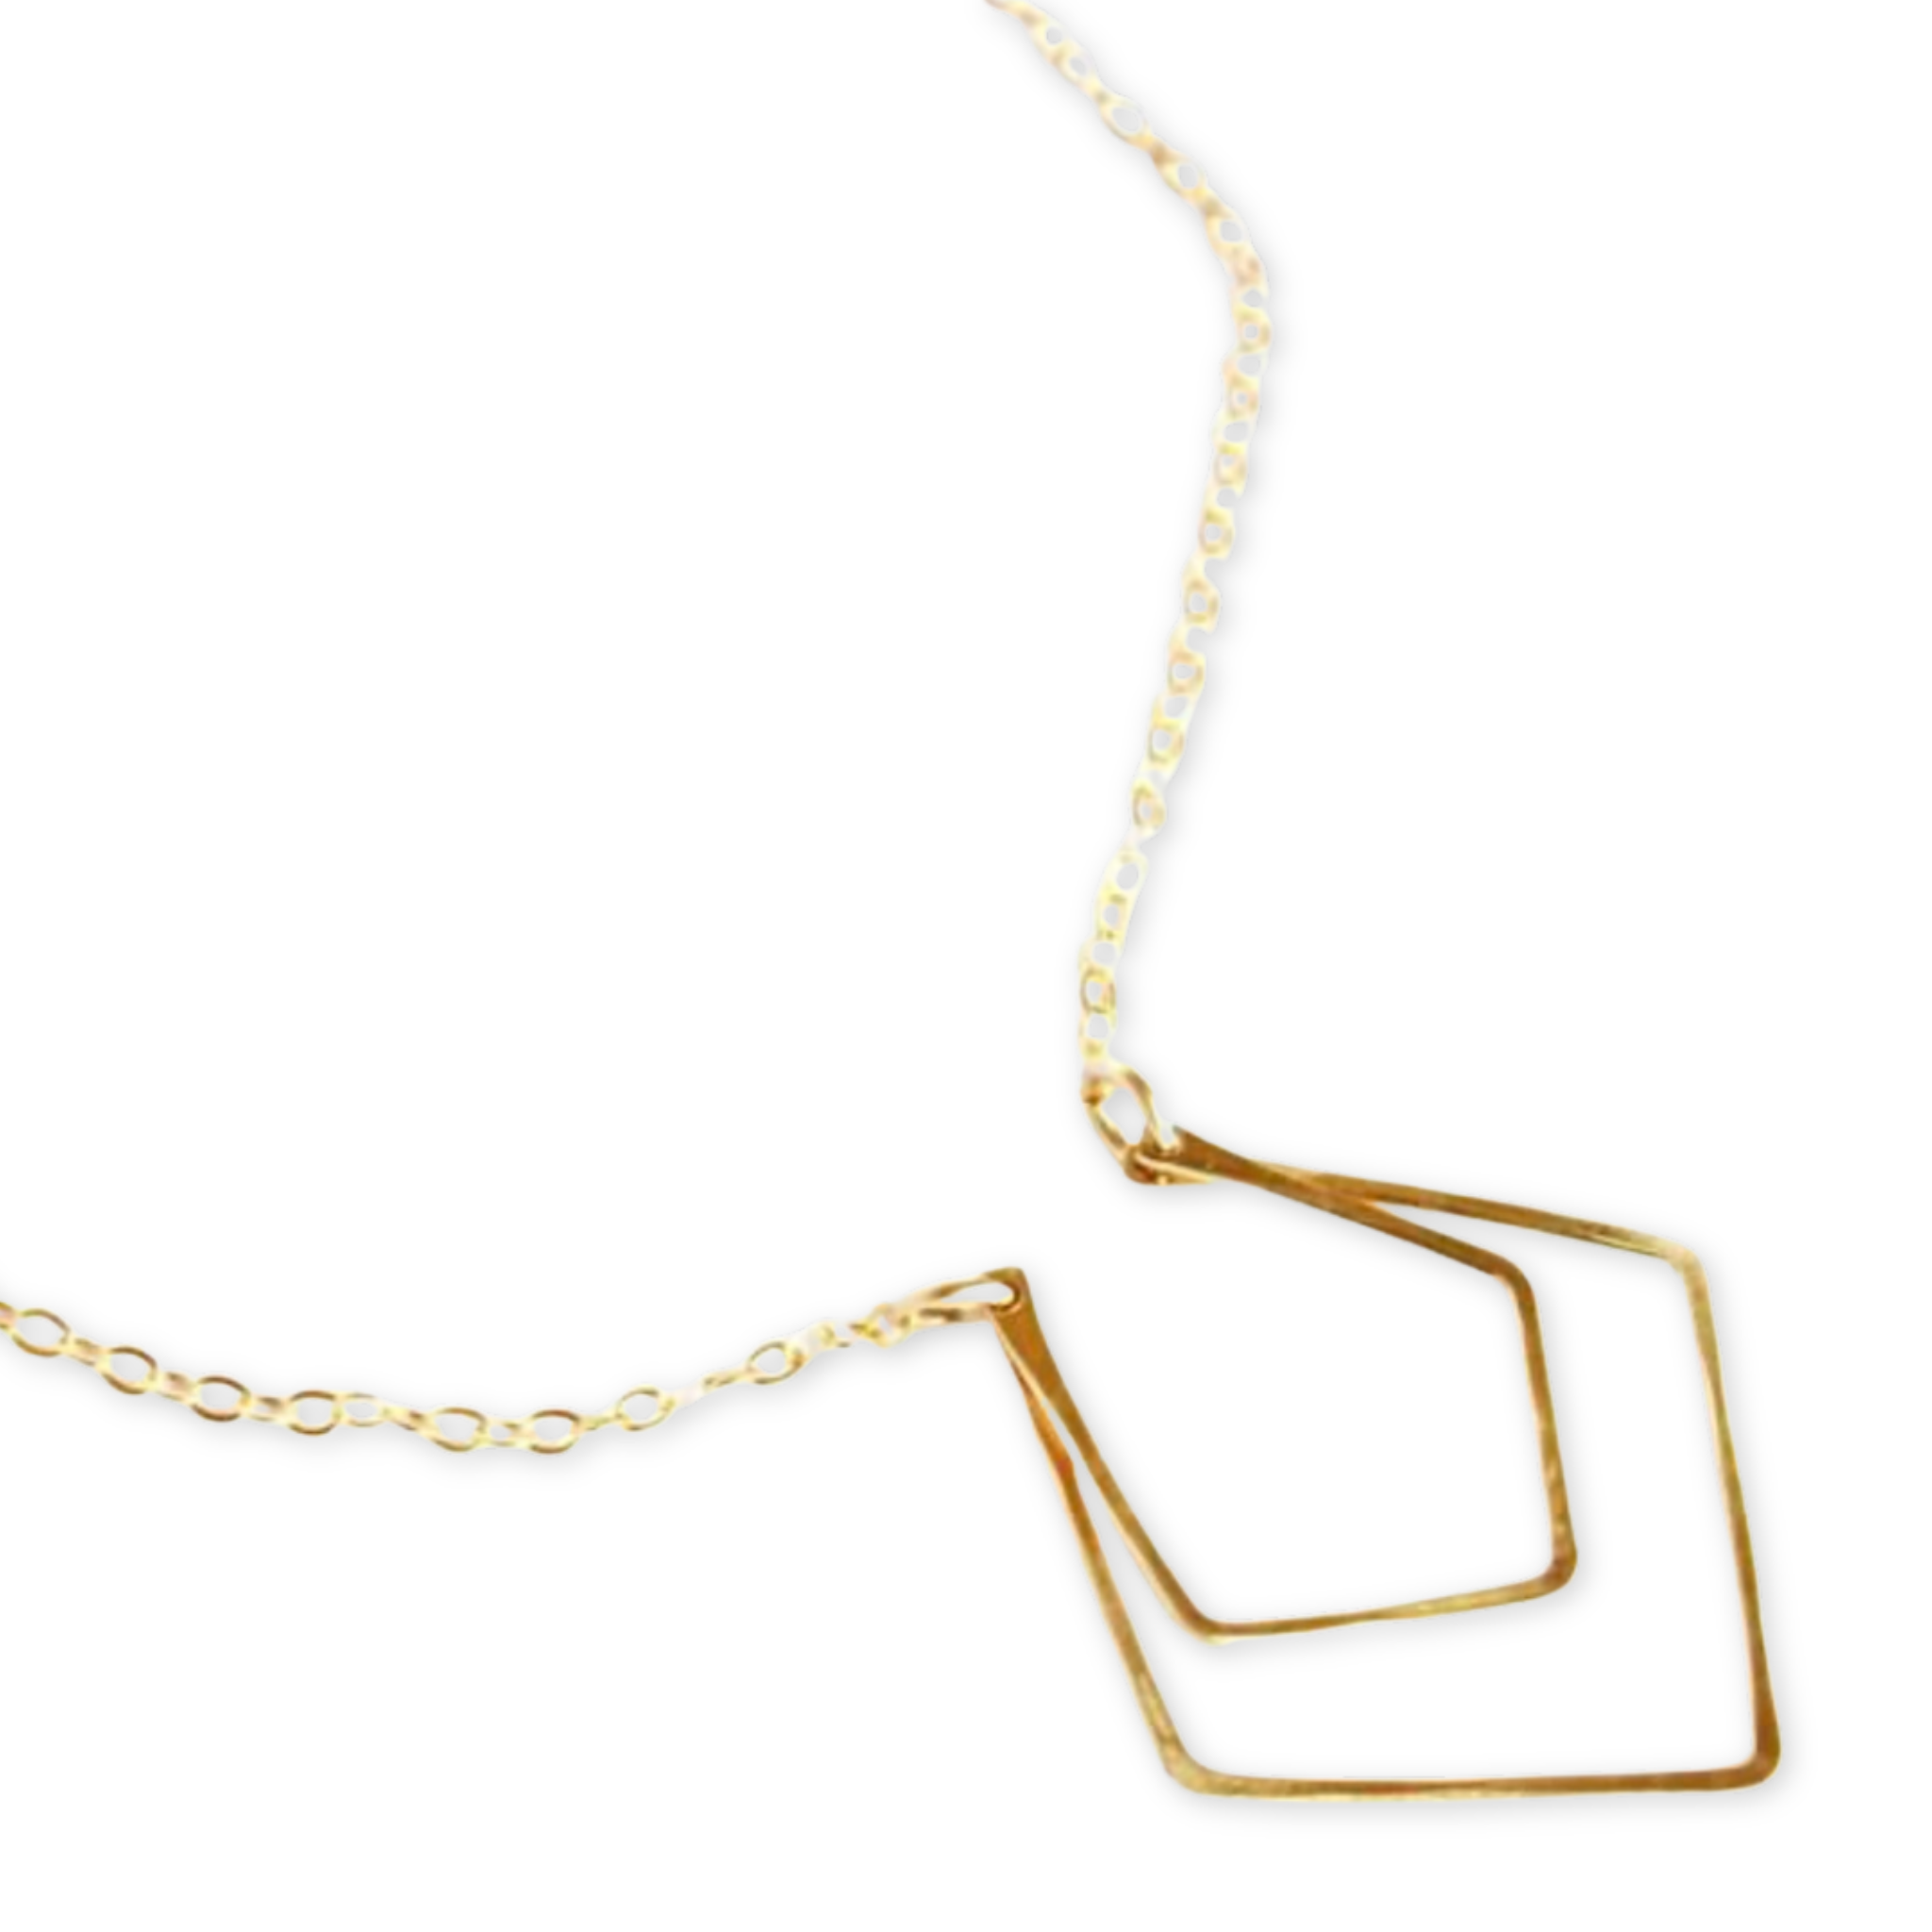 two open geometric shaped pendants hanging from a thin necklace chain